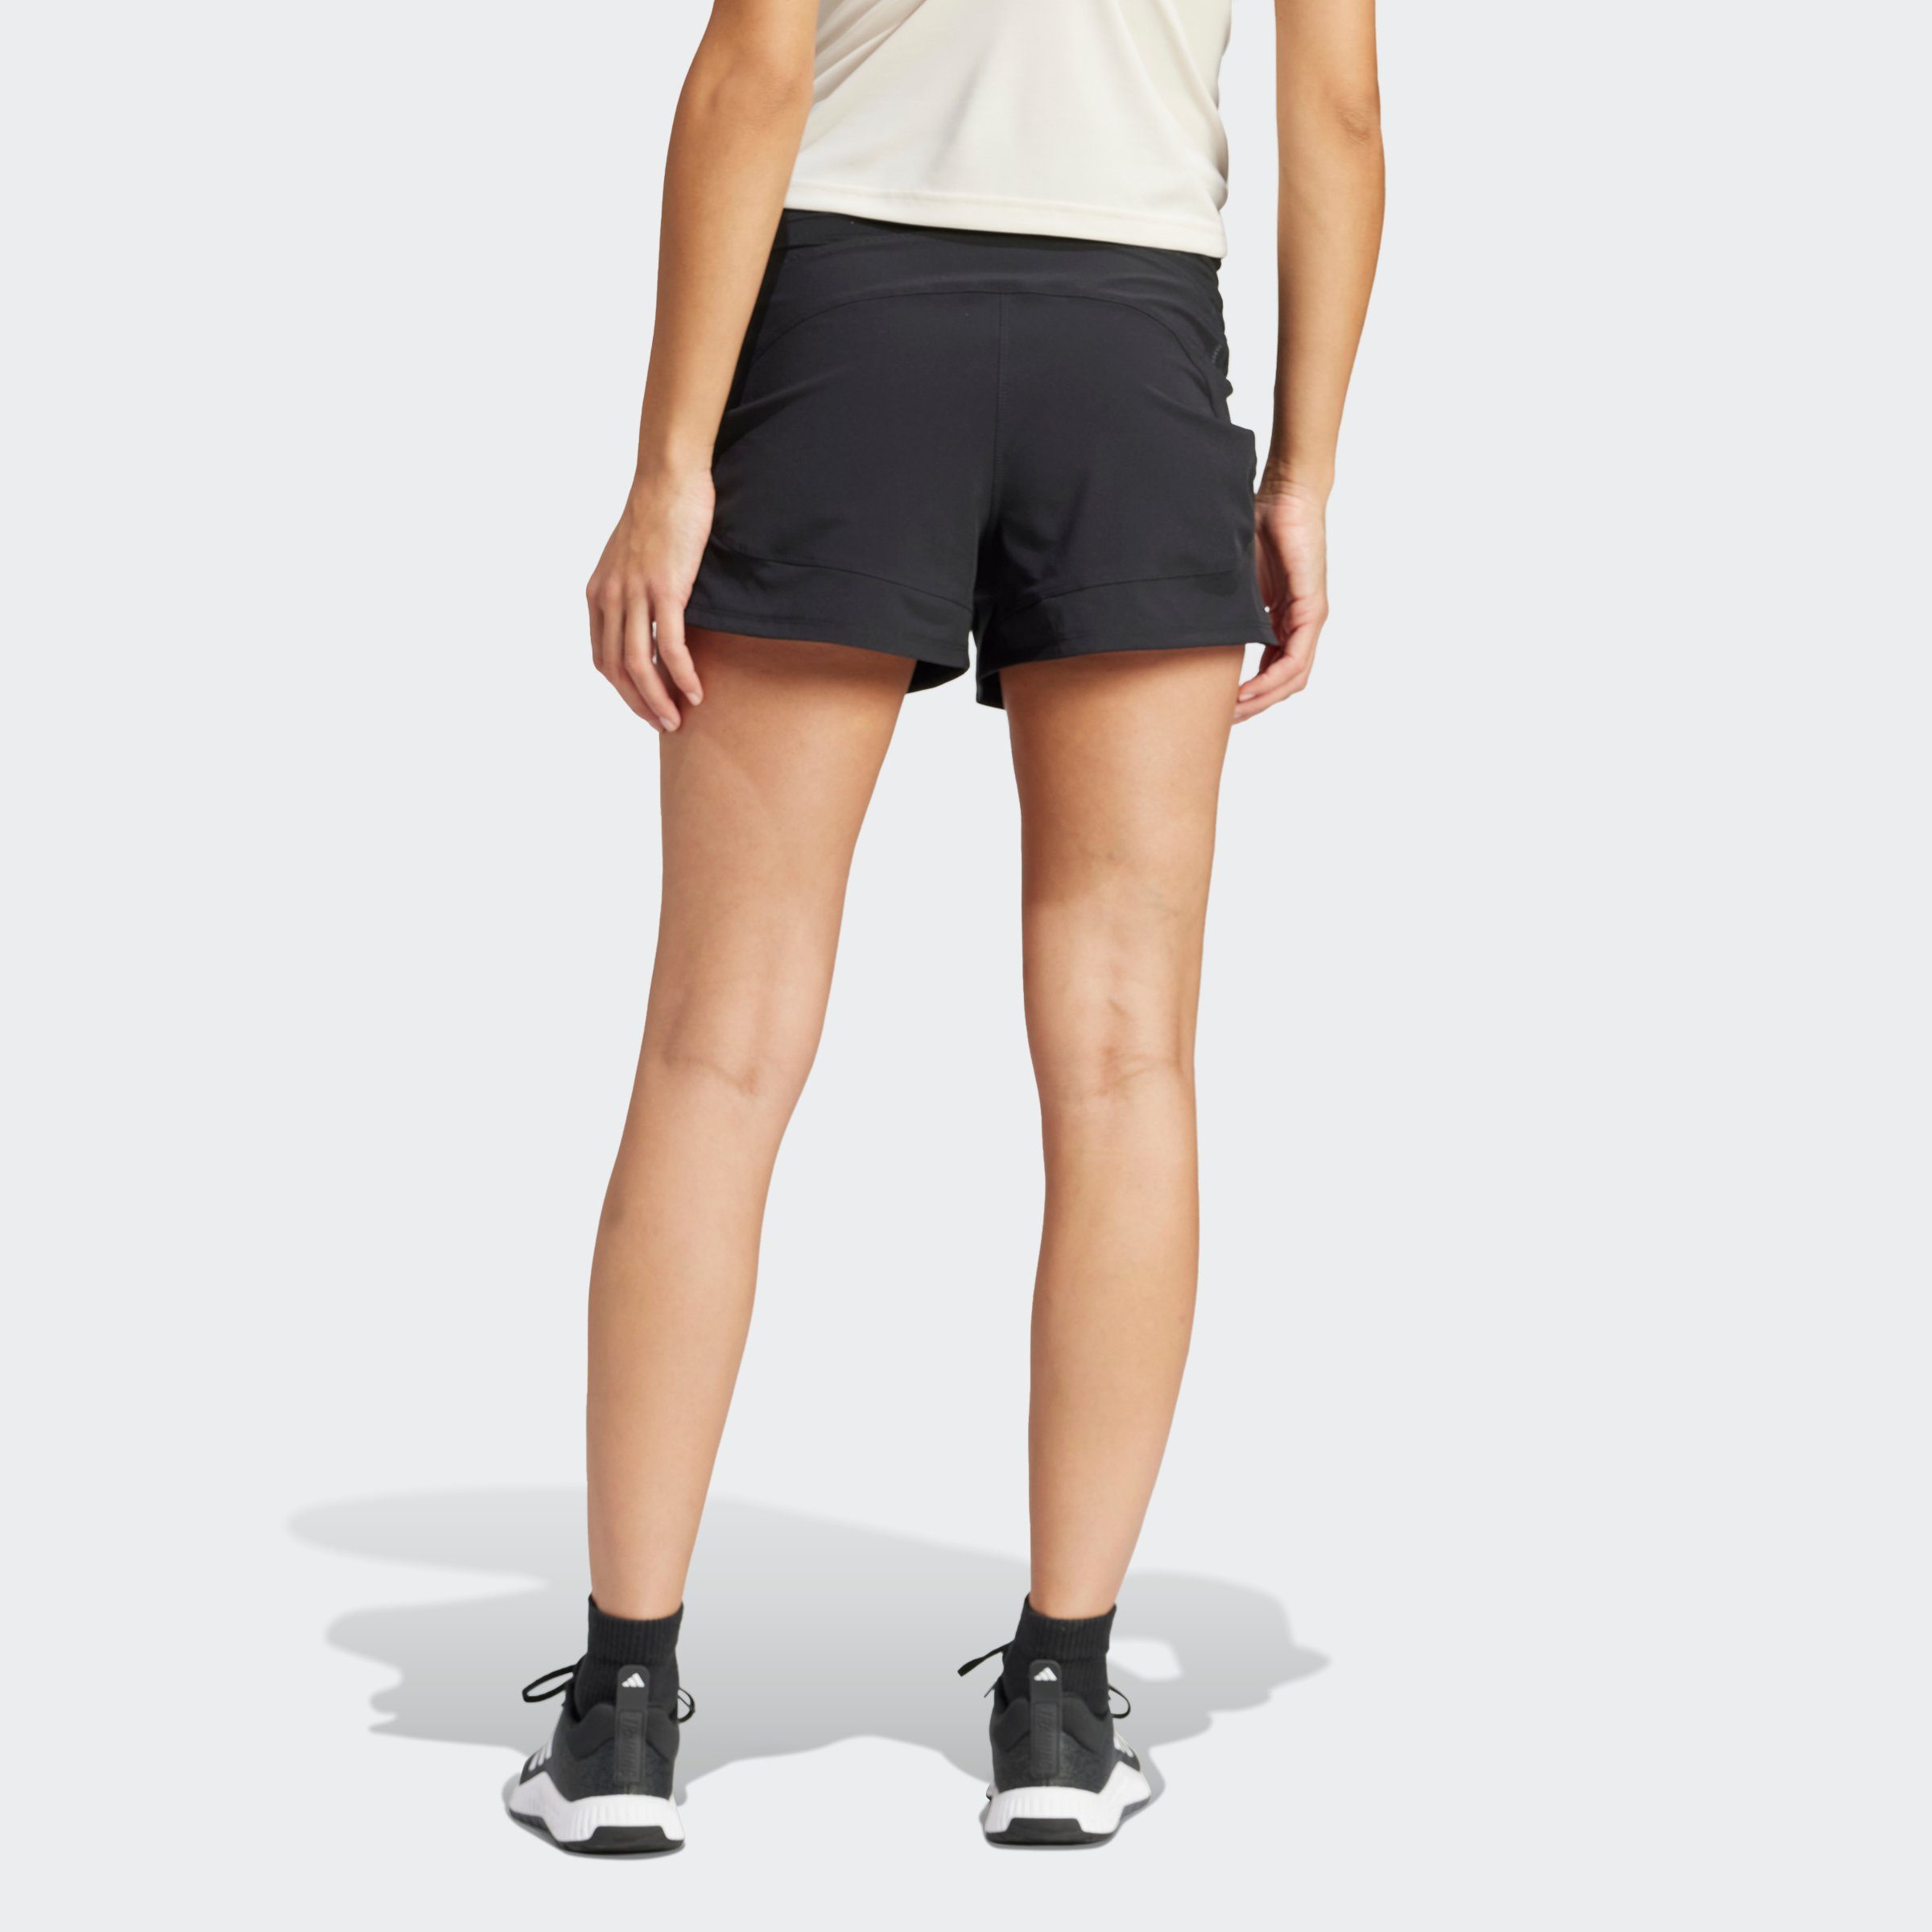 adidas Performance Short PACER MATERNITY (1-delig)